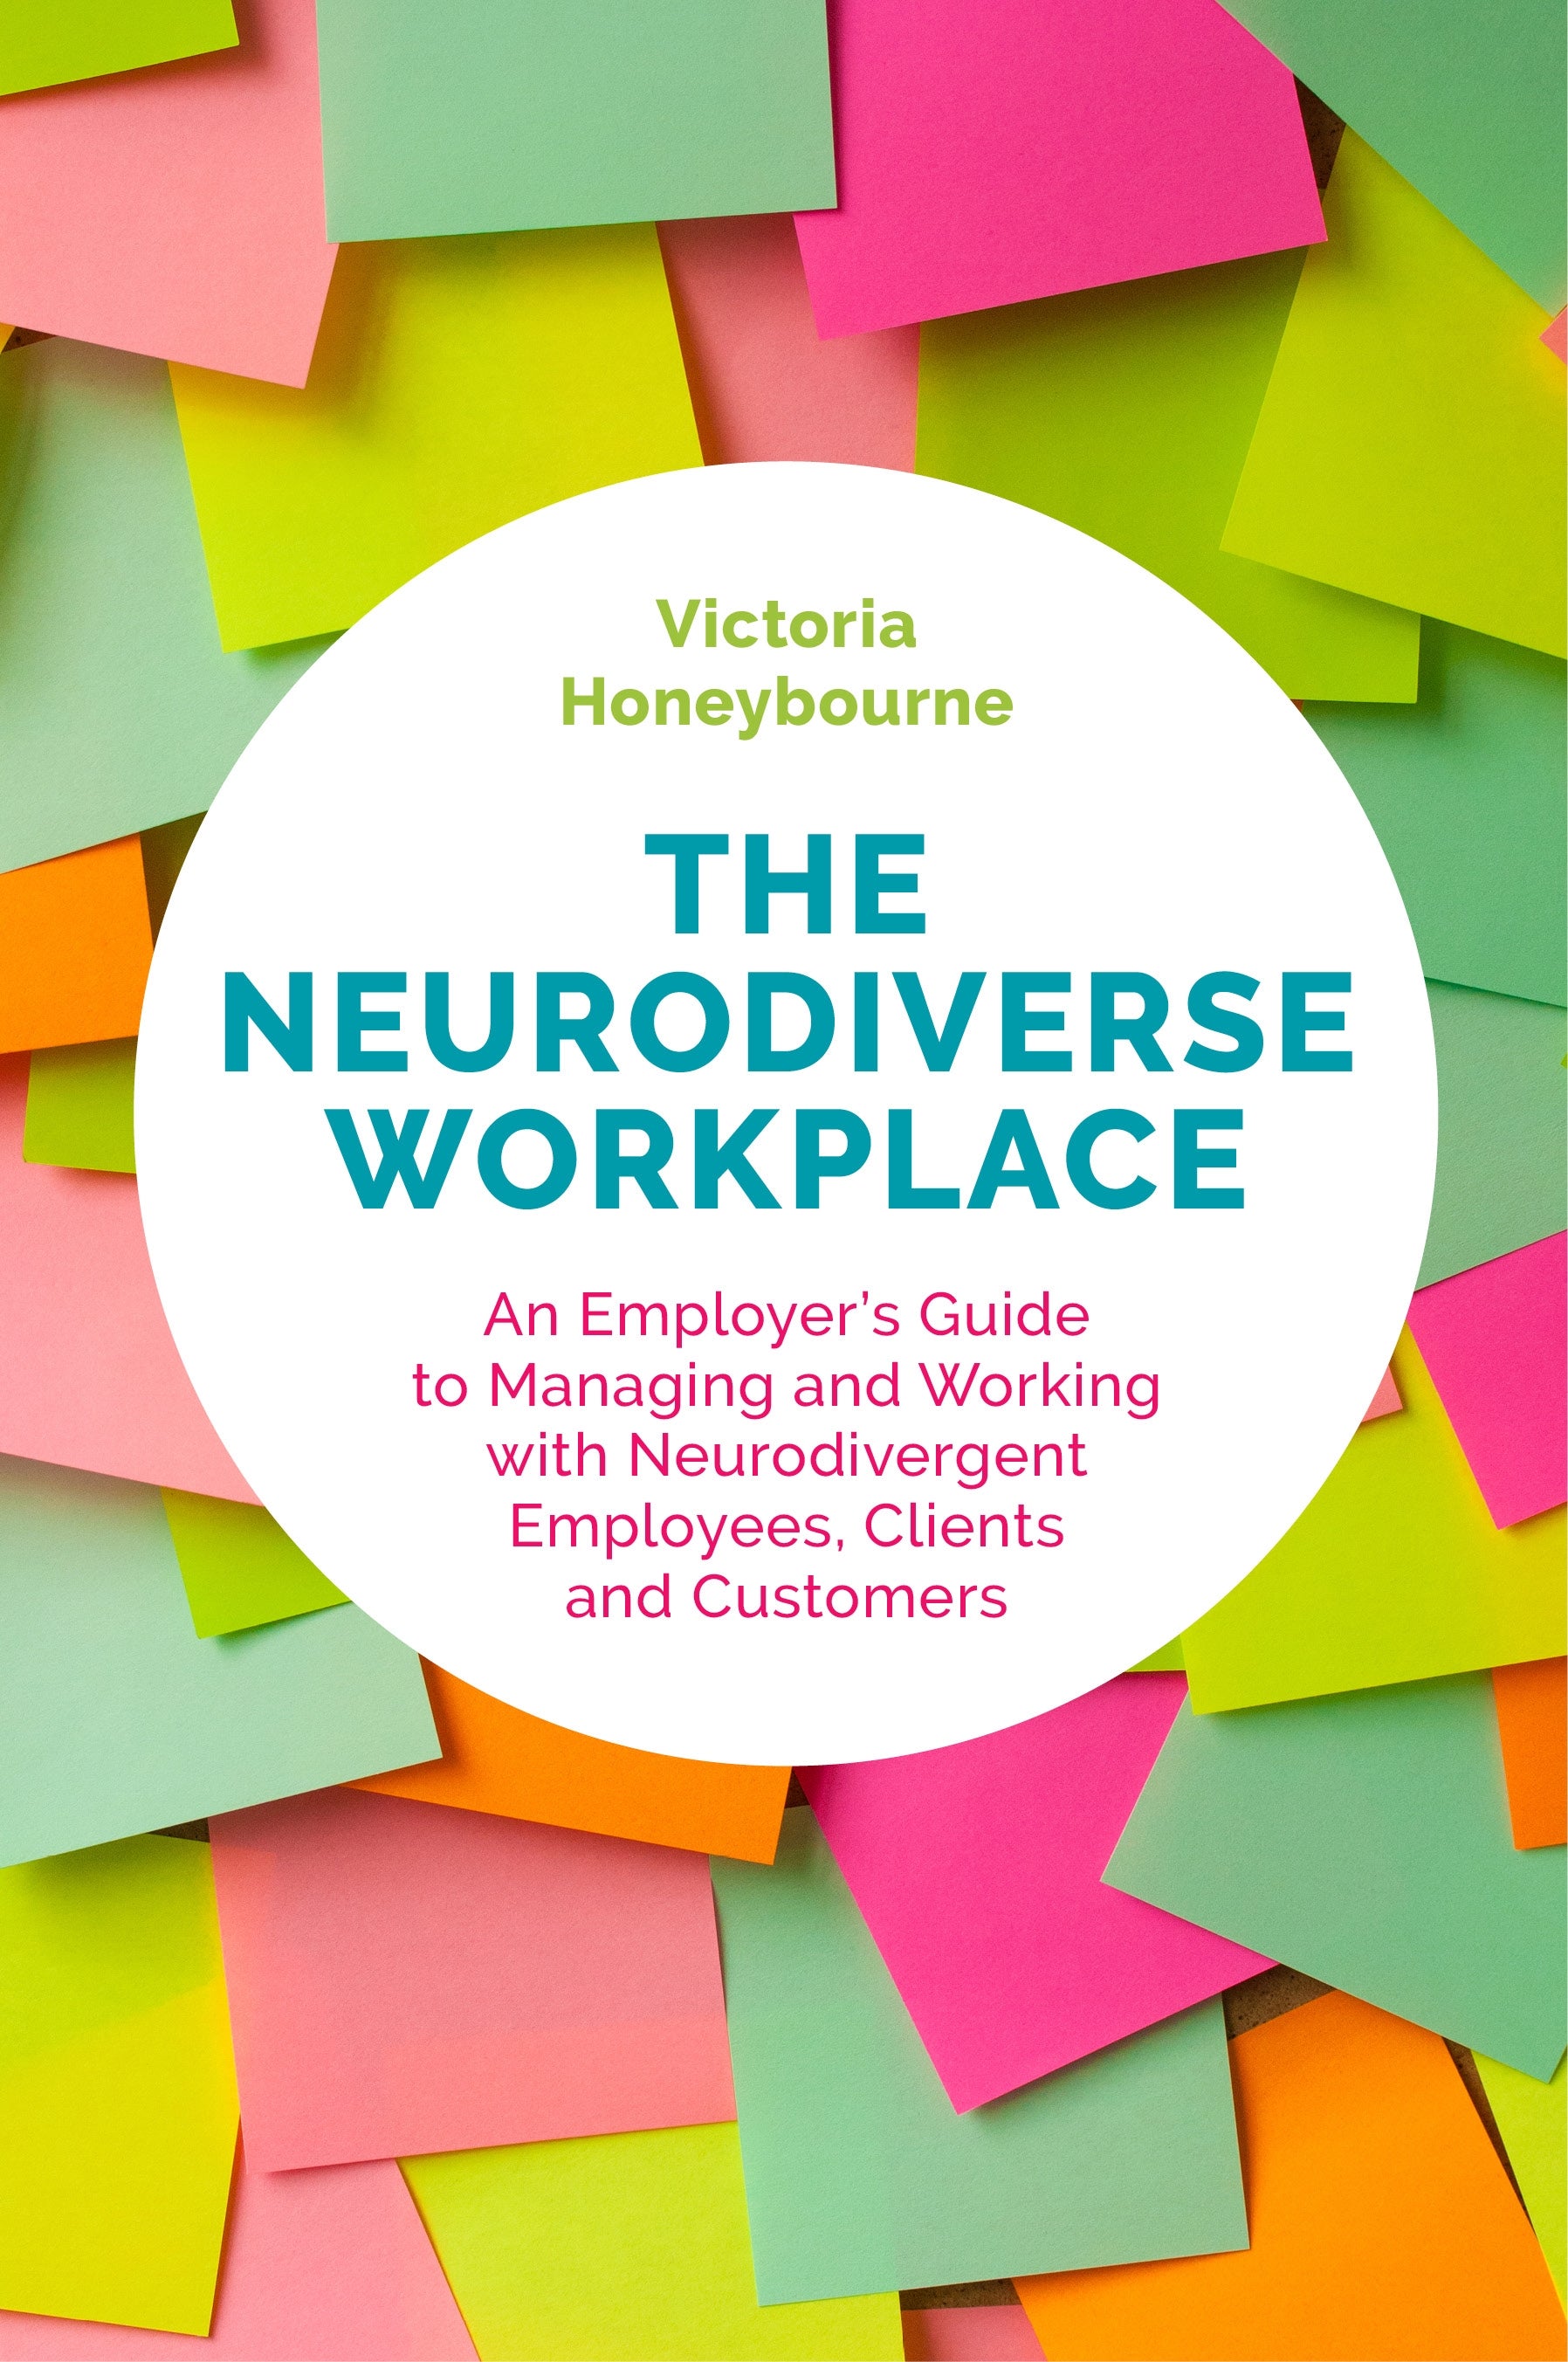 The Neurodiverse Workplace by Victoria Honeybourne